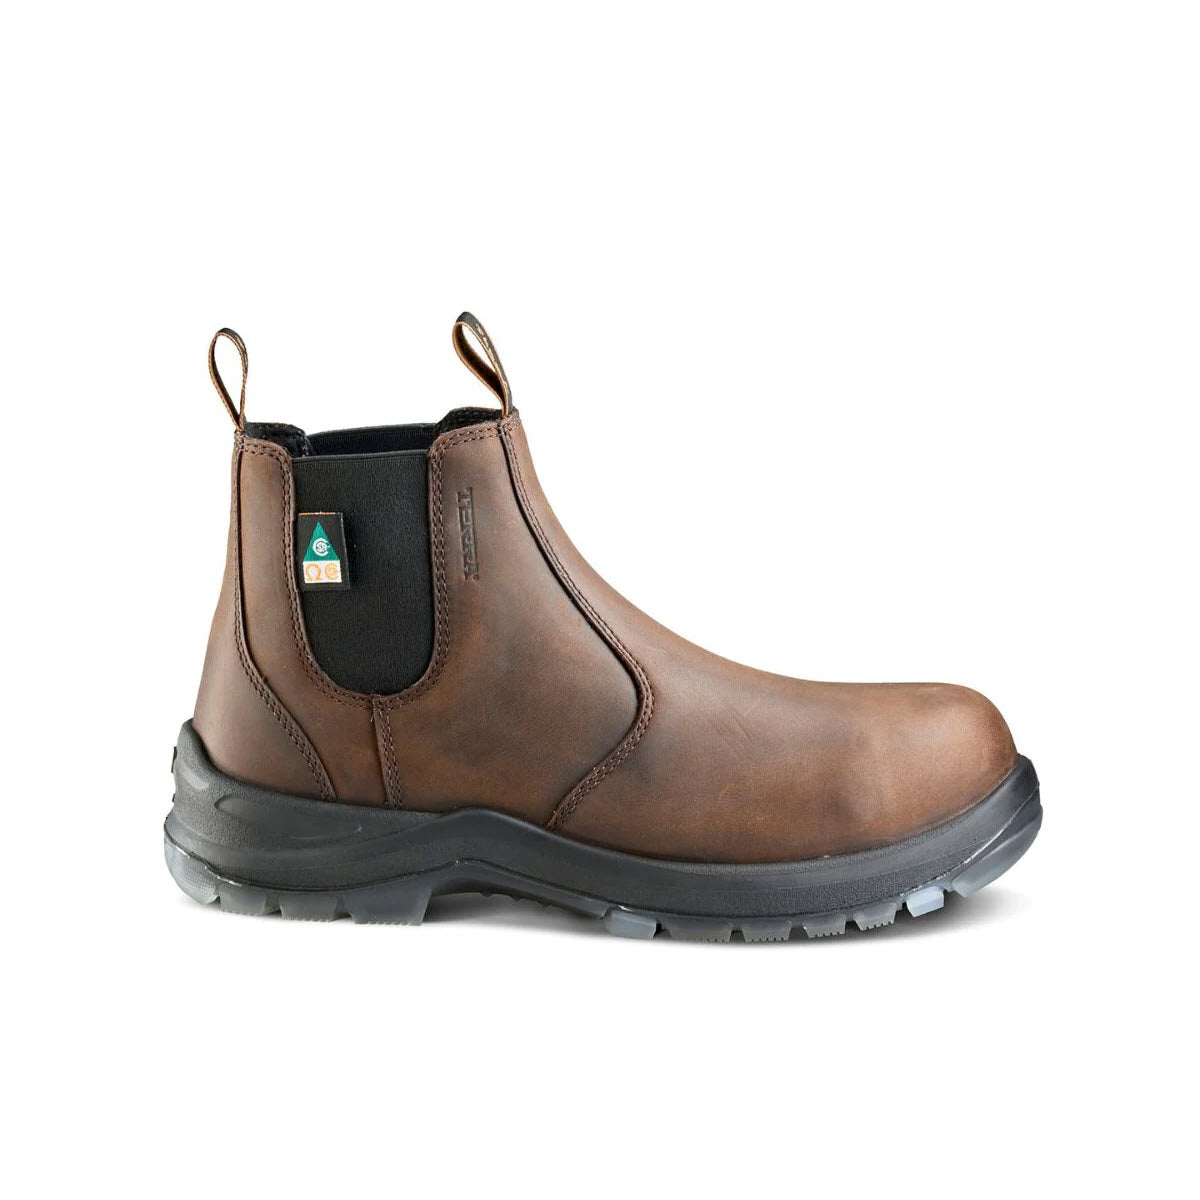 A single Terra Composite Toe Murphy waterproof Chelsea boot in dark brown leather with elastic side panels and a heavy-duty rubber sole, isolated on a white background.